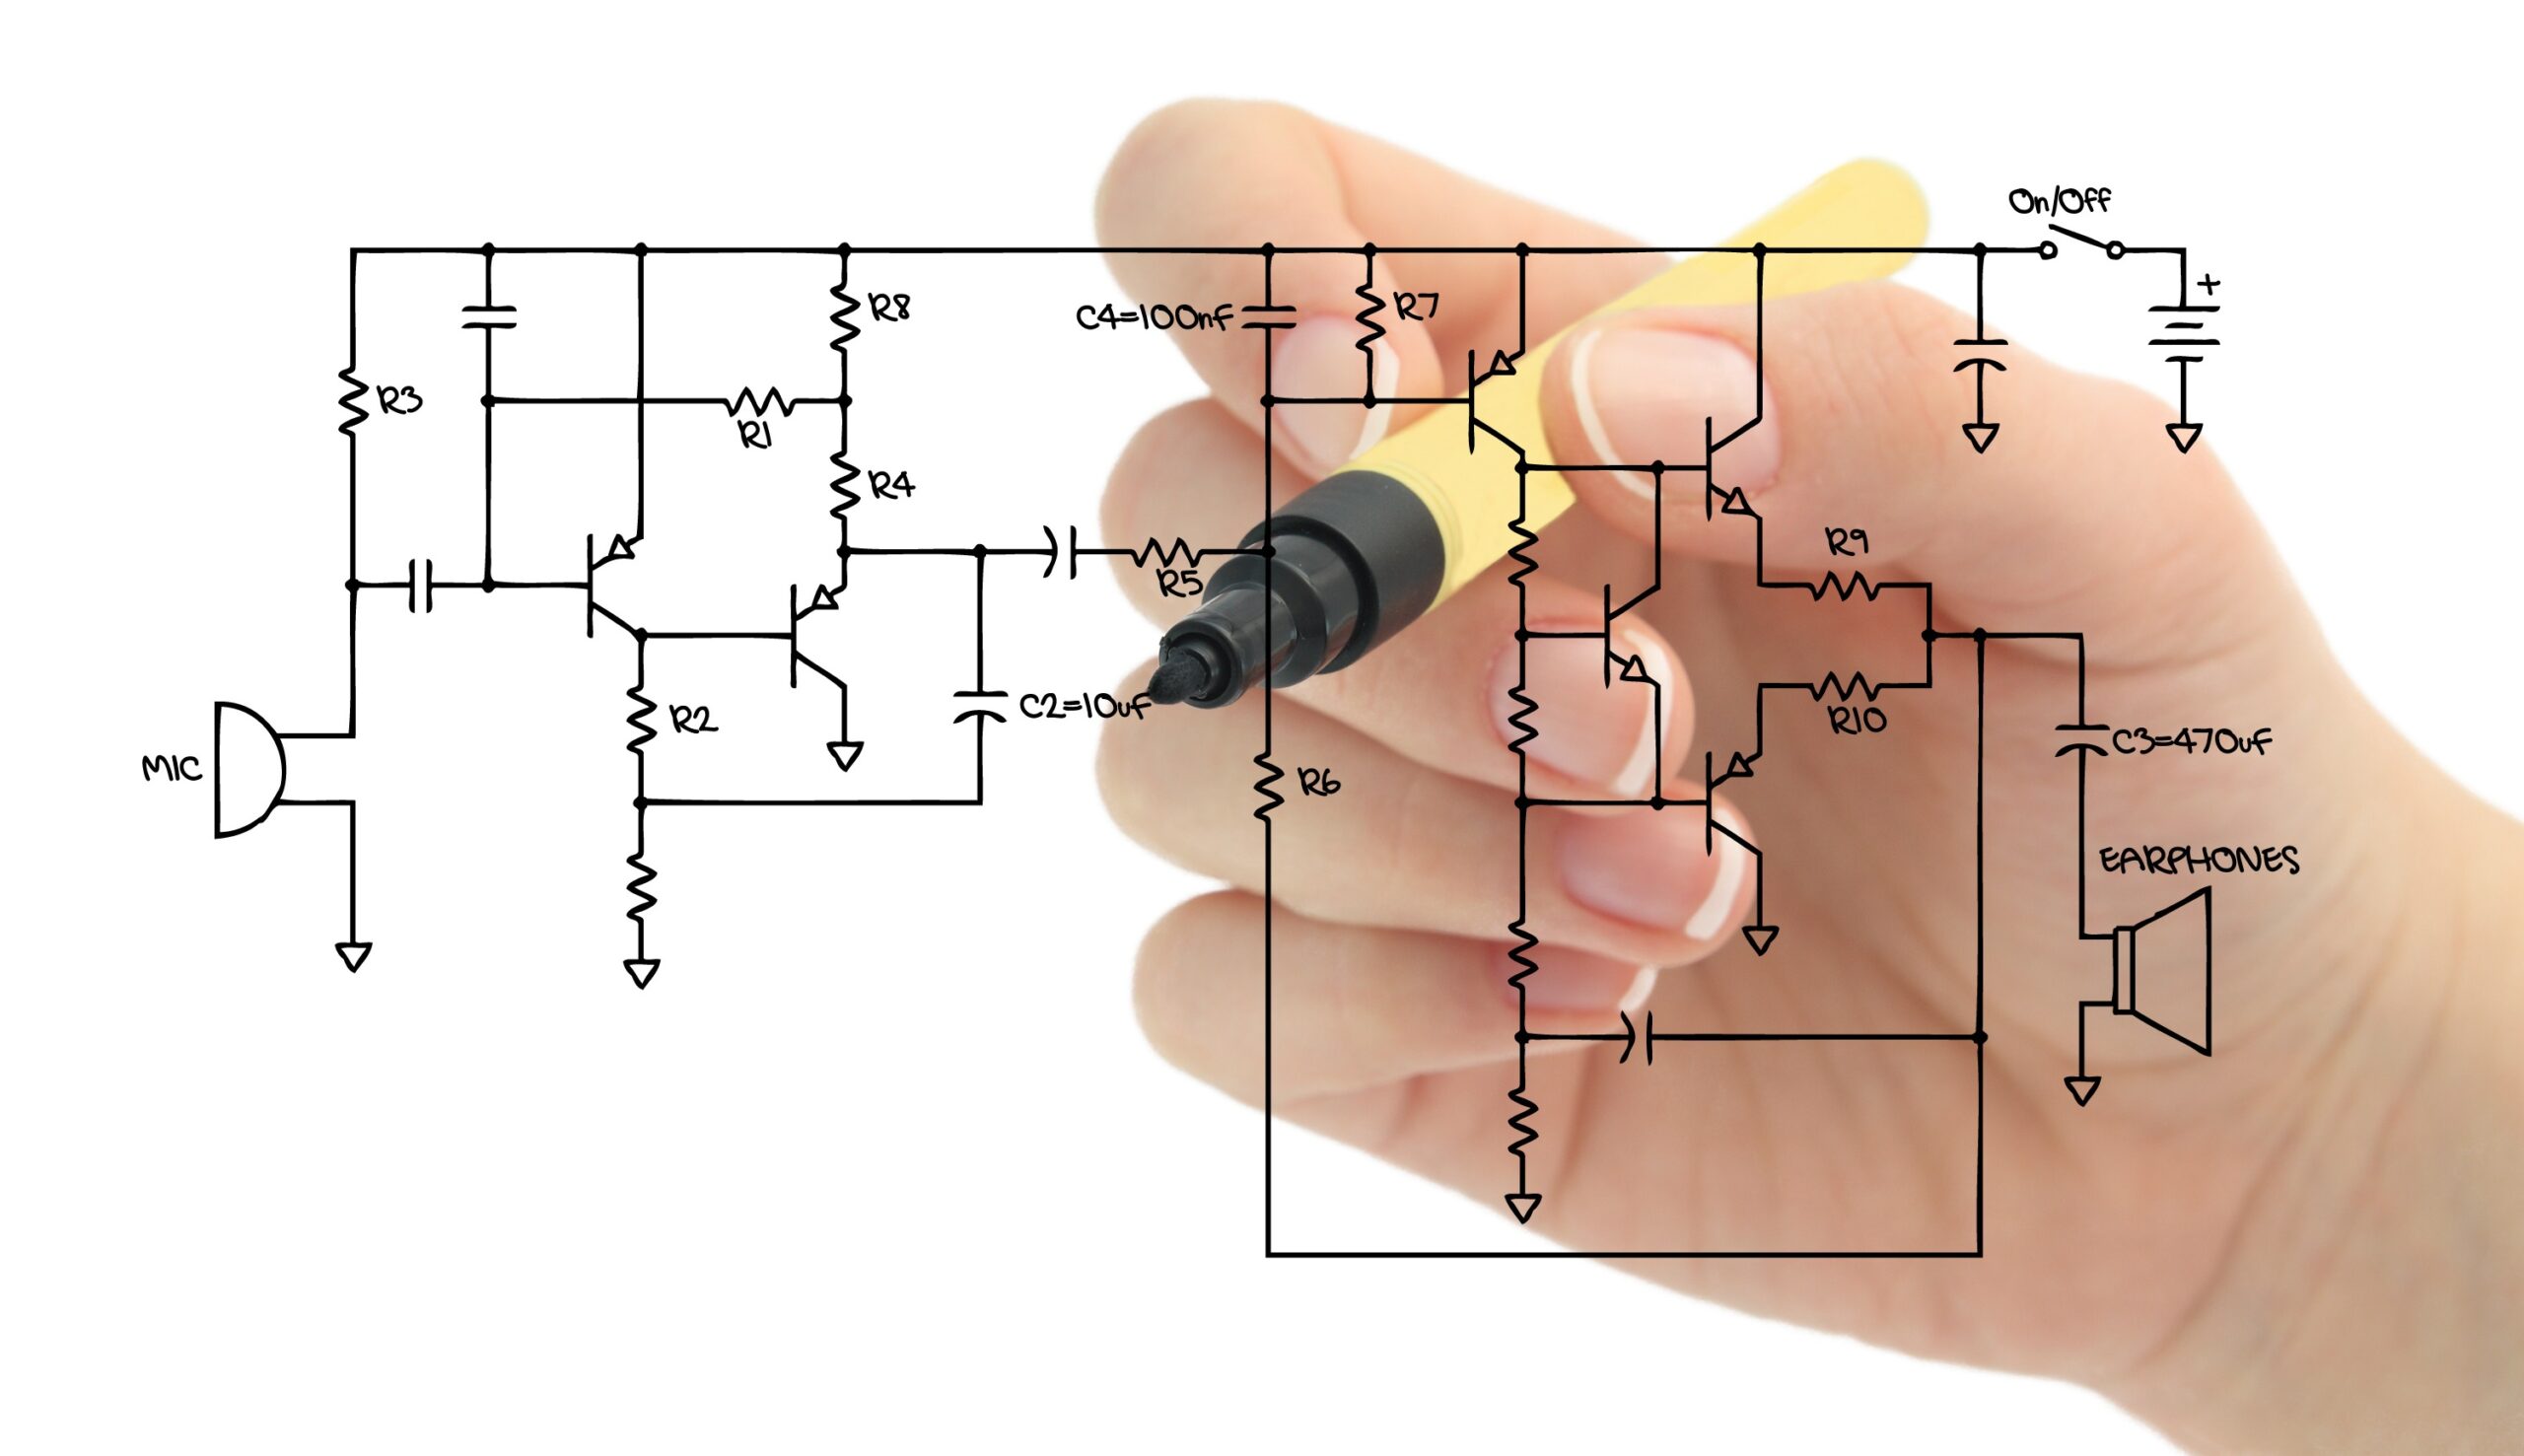 A hand grasping a marker used to draw a circuit schematic.